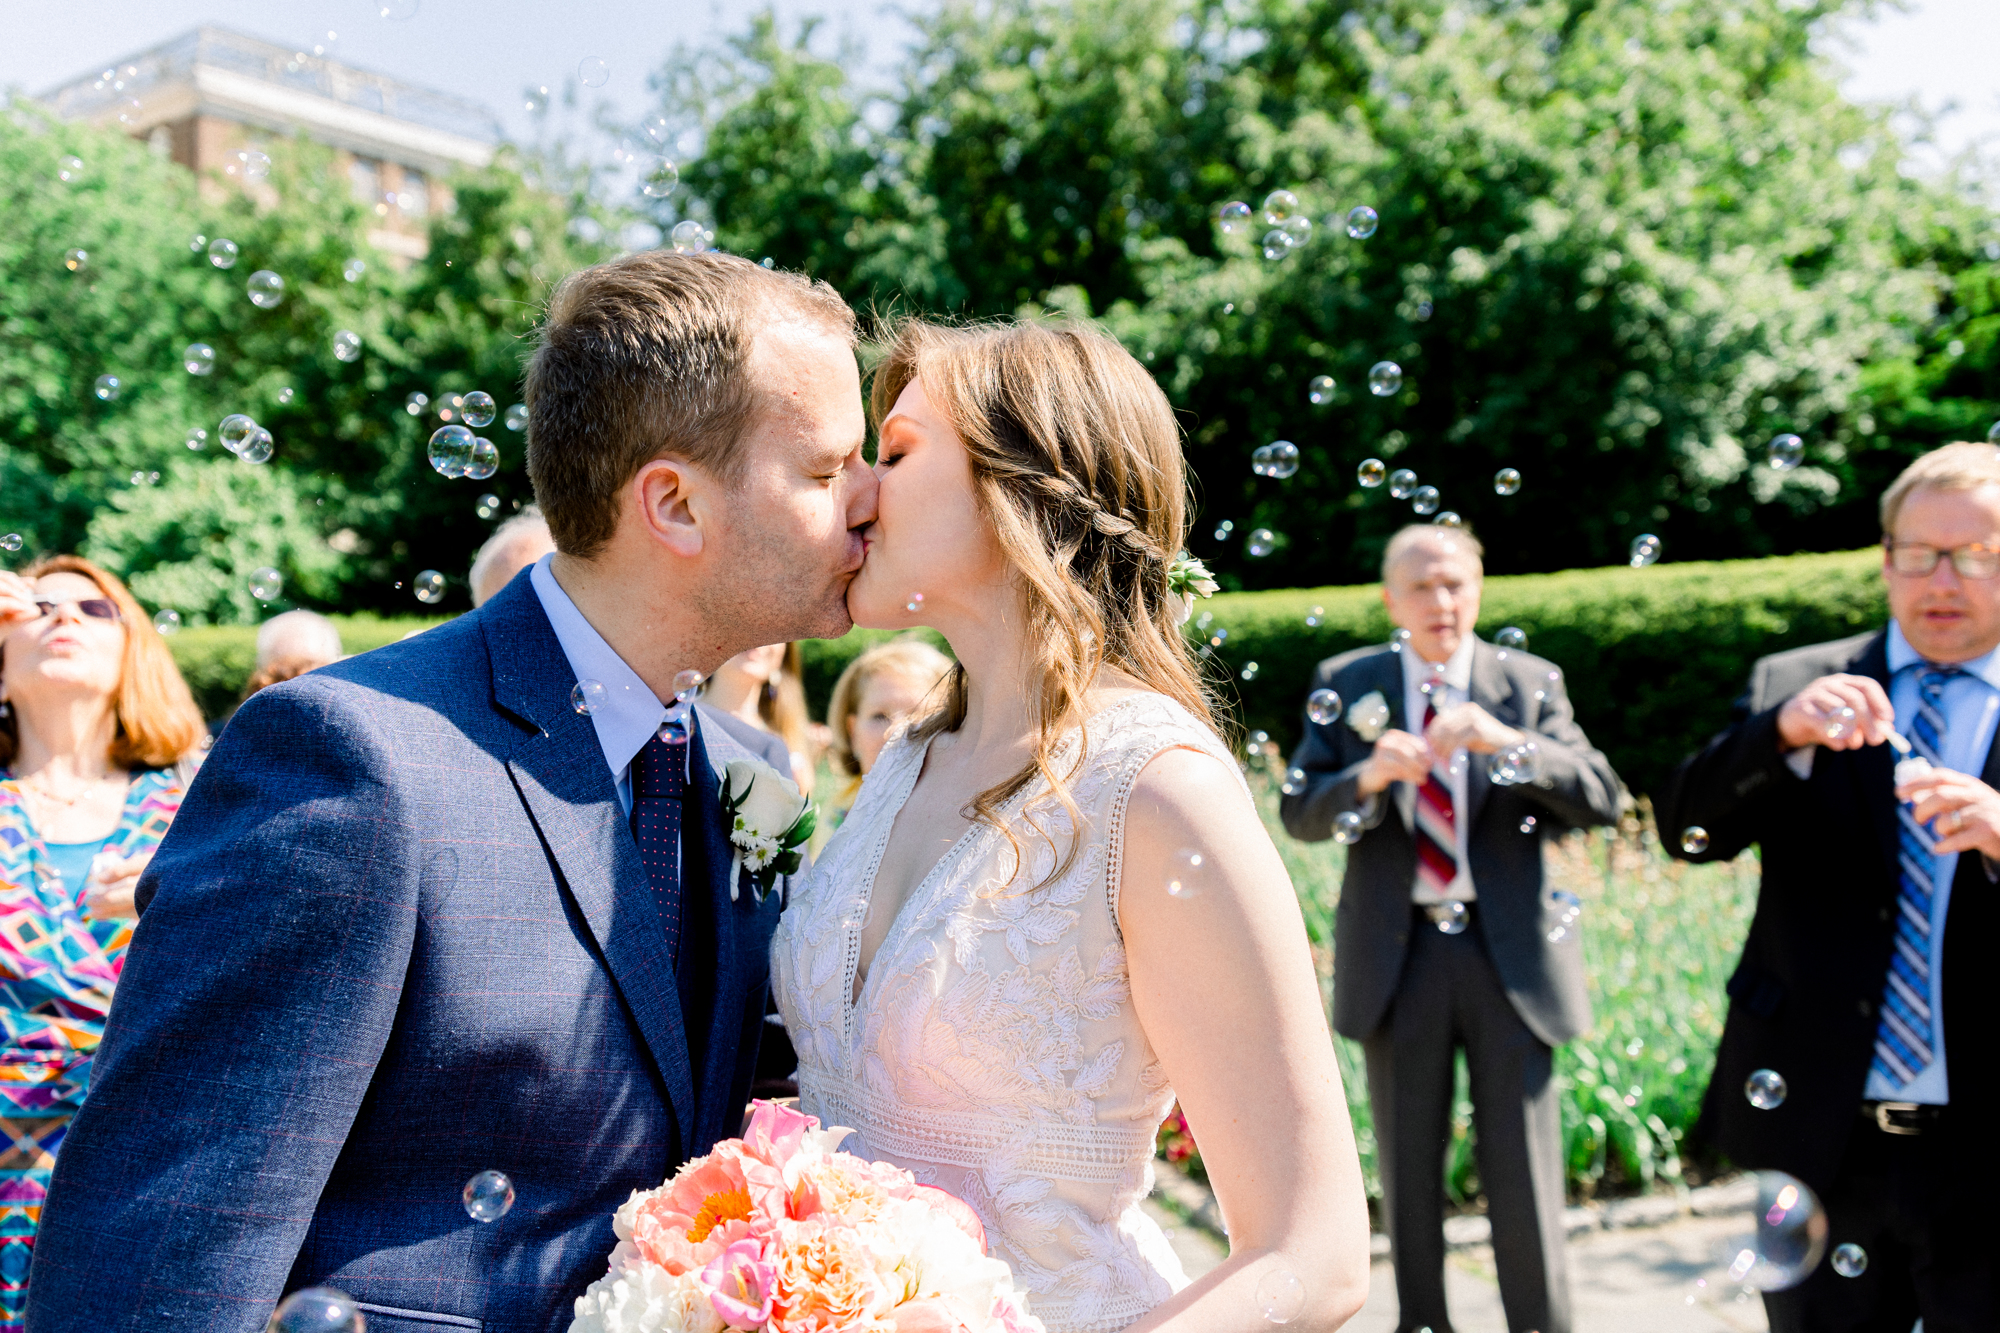 Picturesque Summer Wedding Photos at the Conservatory Garden in Central Park New York